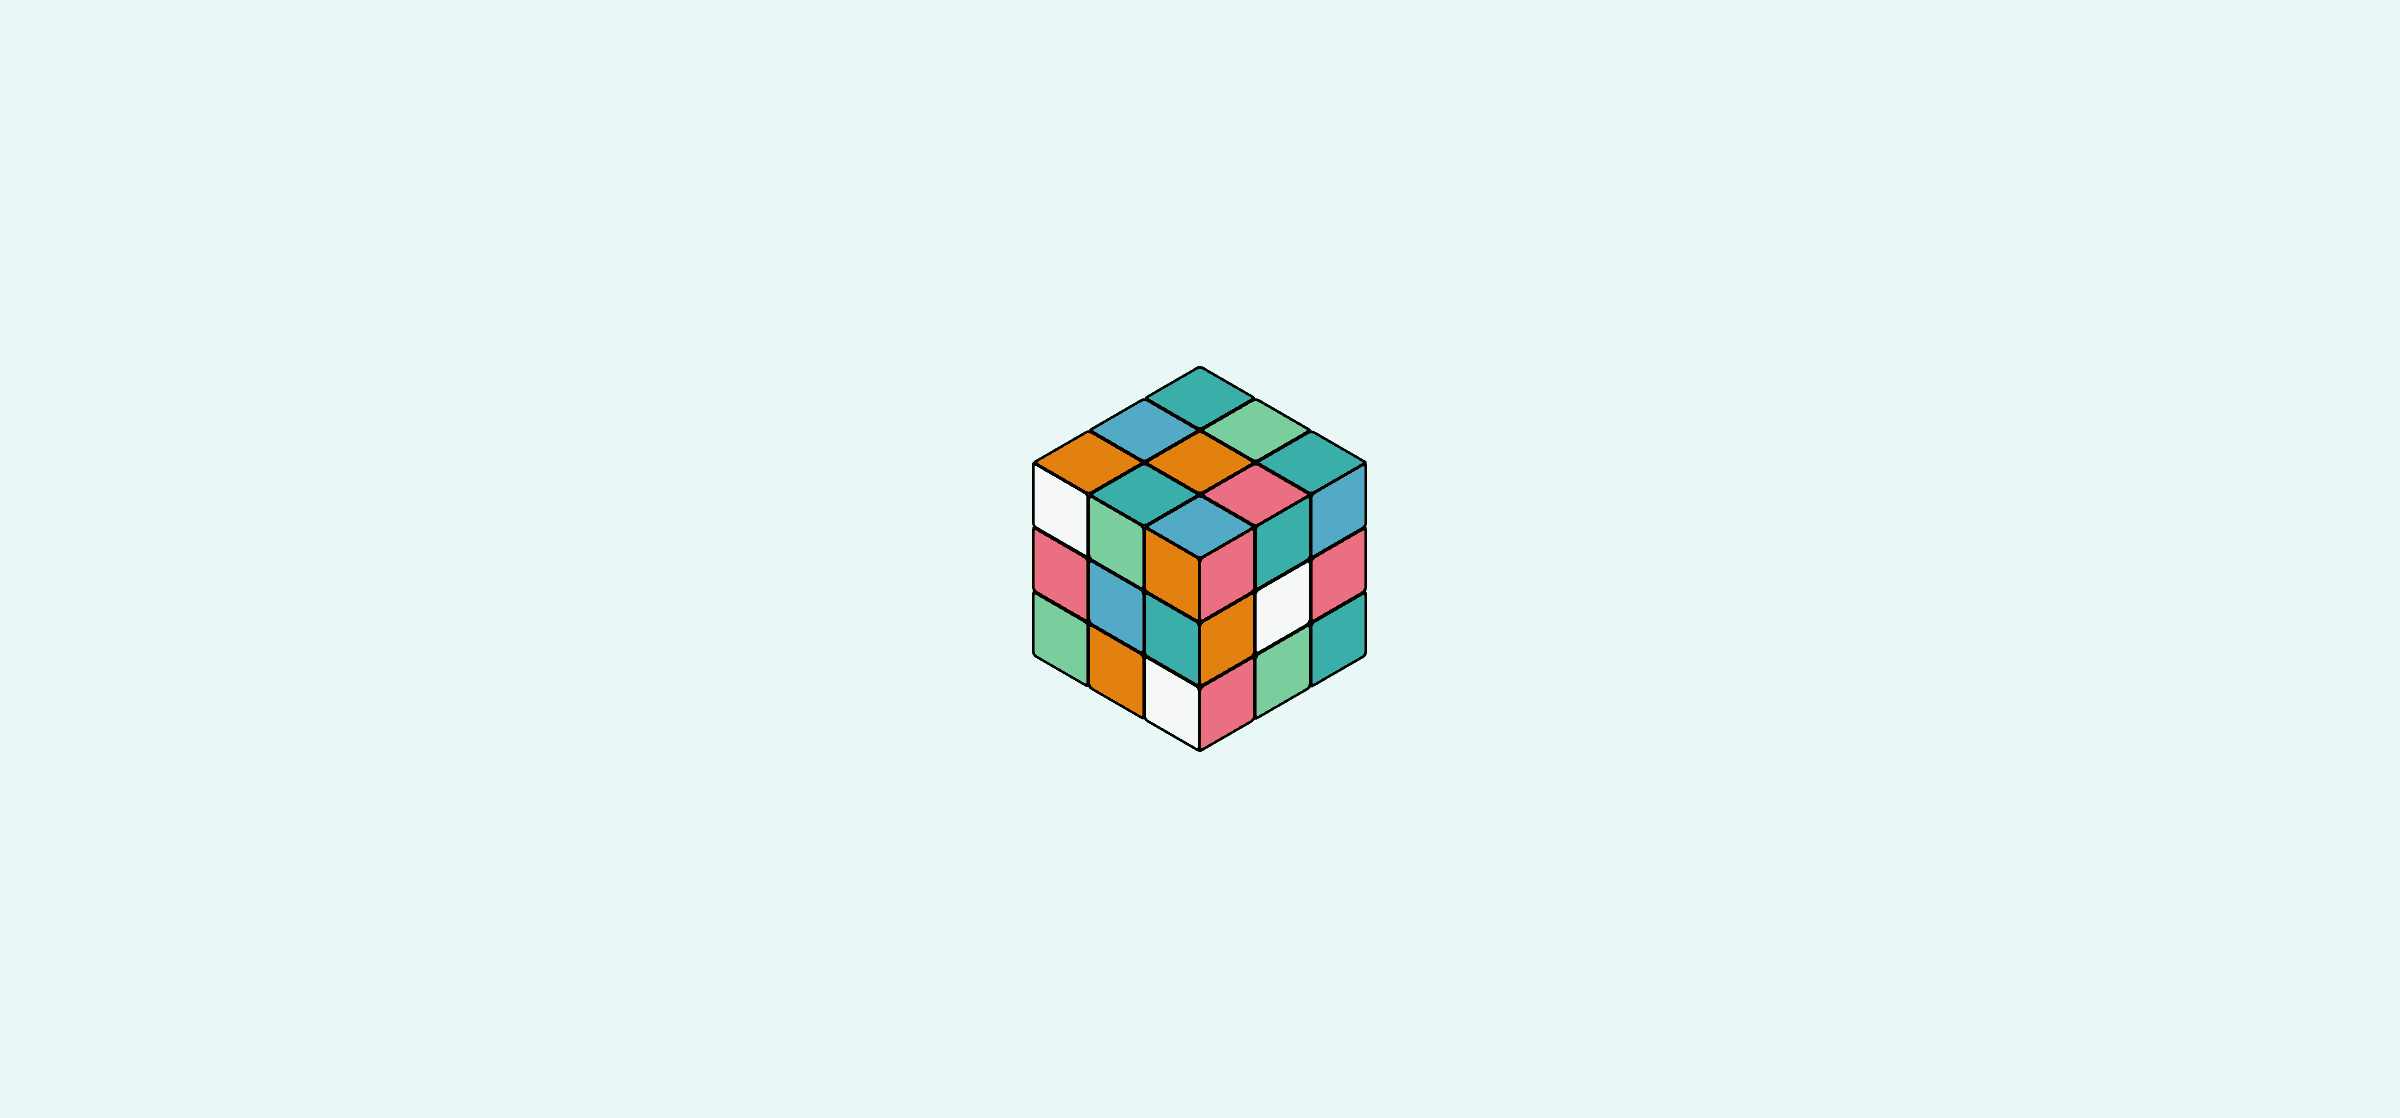 A rubik's cube, representing a need to manage people, not processes